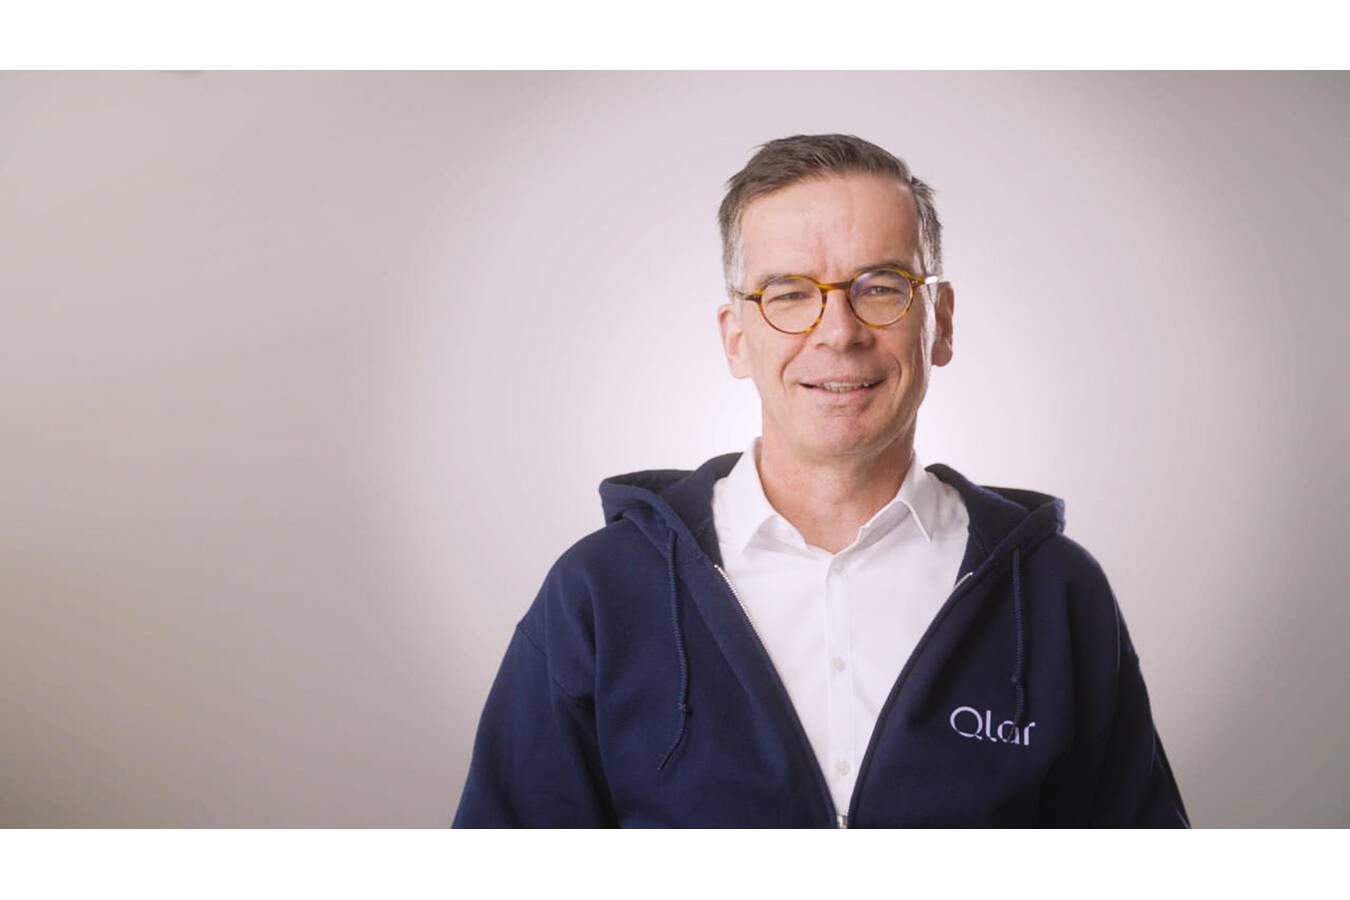 Climate-neutral circular economy: Schenck Process becomes Qlar Schenck Process will rebrand to Qlar on 13 May 2024, extending its focus on digitally enabled and sustainable solutions.